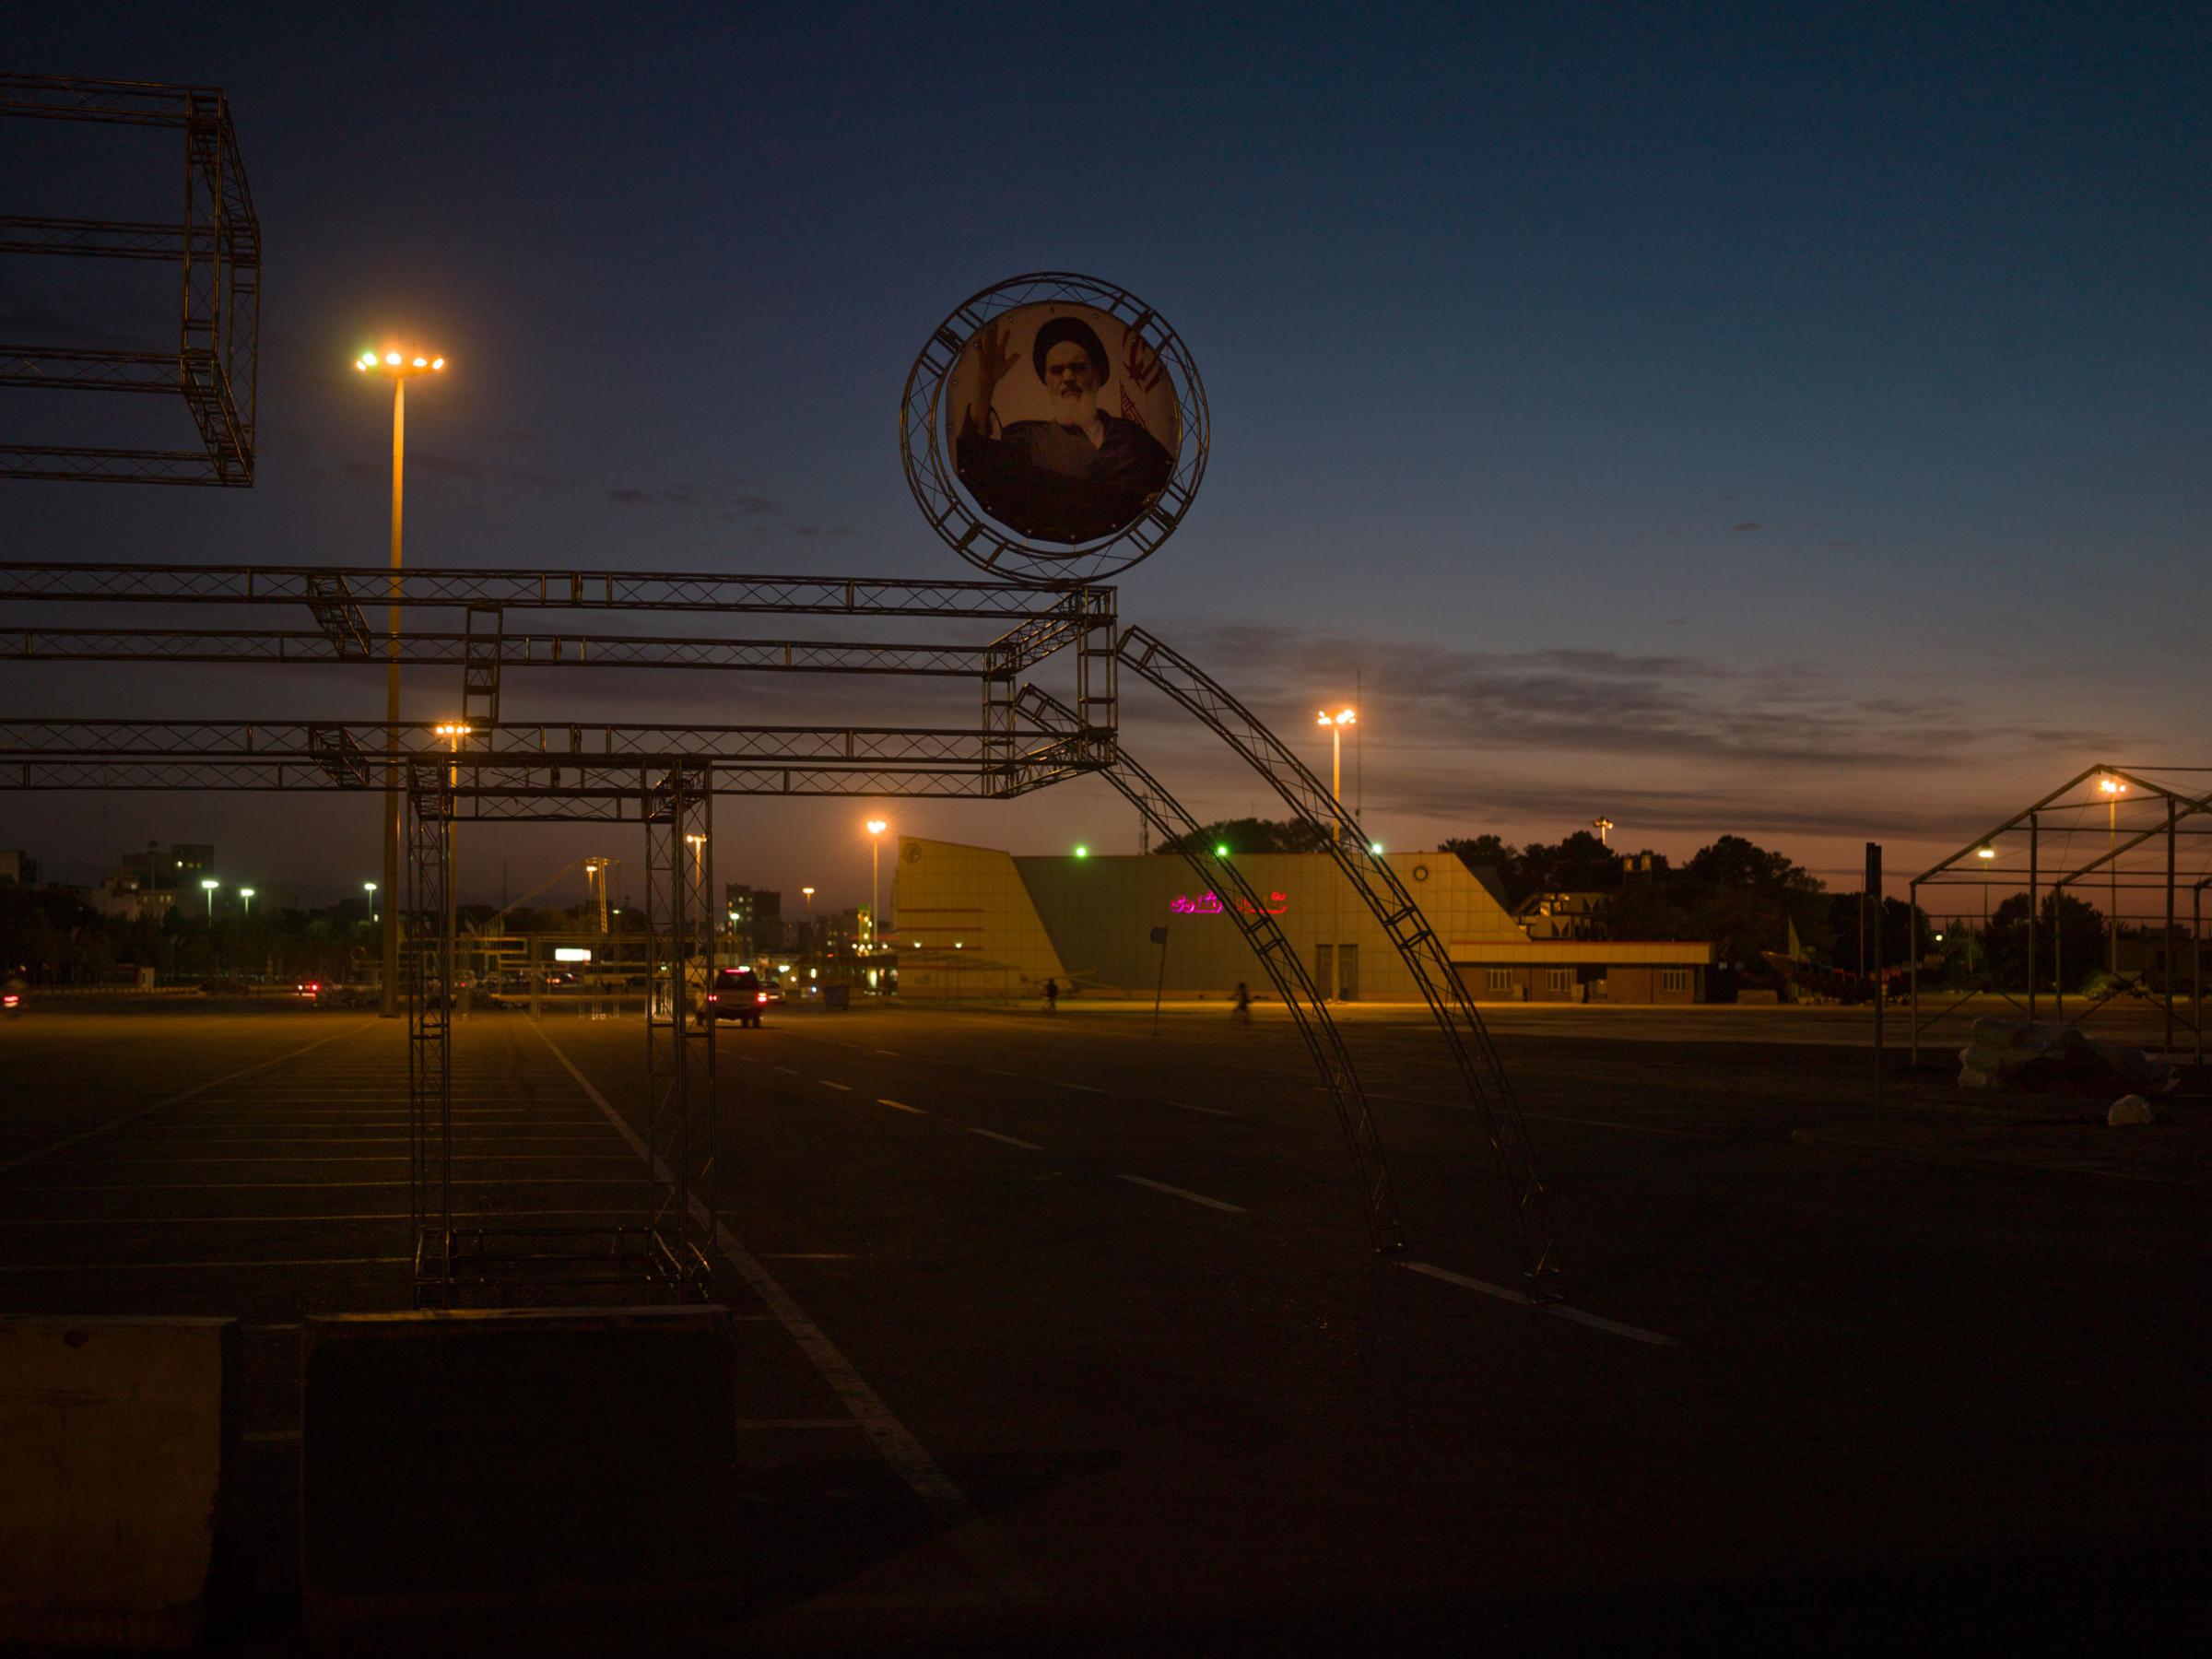 A portrait of the late founder of the Islamic republic, Ayatollah Khomeini at an empty parking lot.